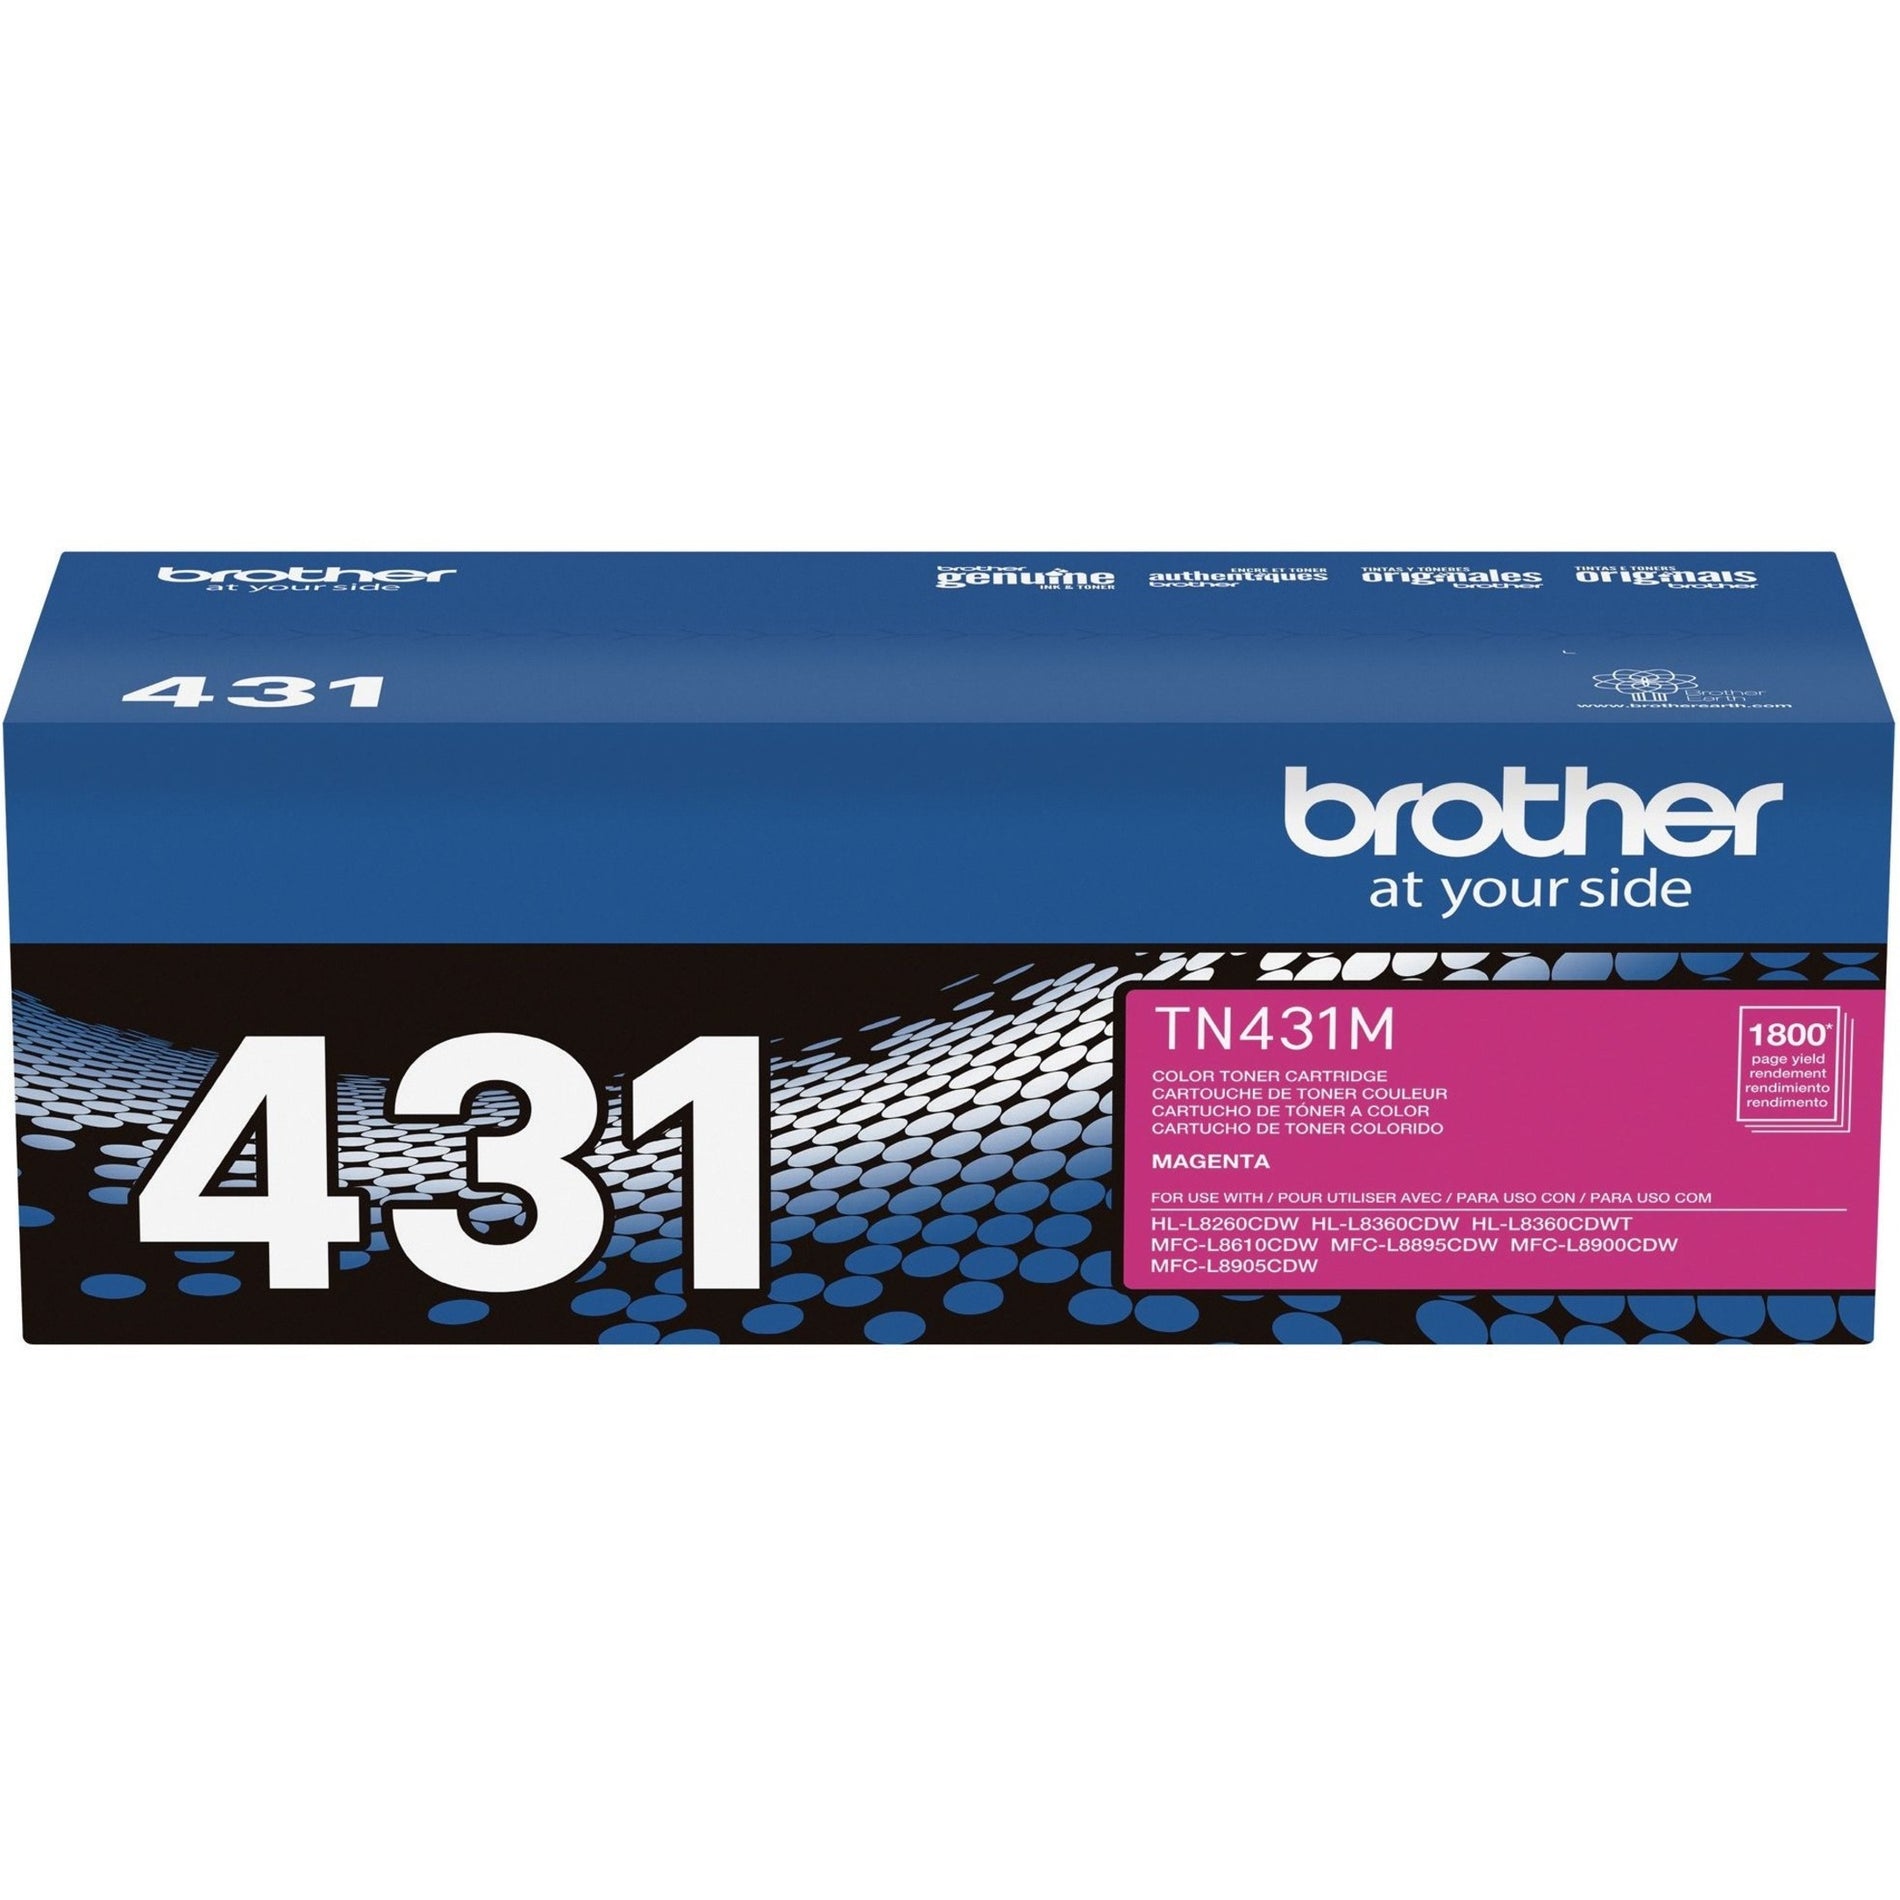 Brother TN431M Toner Cartridge, Magenta, 1800 Pages Standard Yield